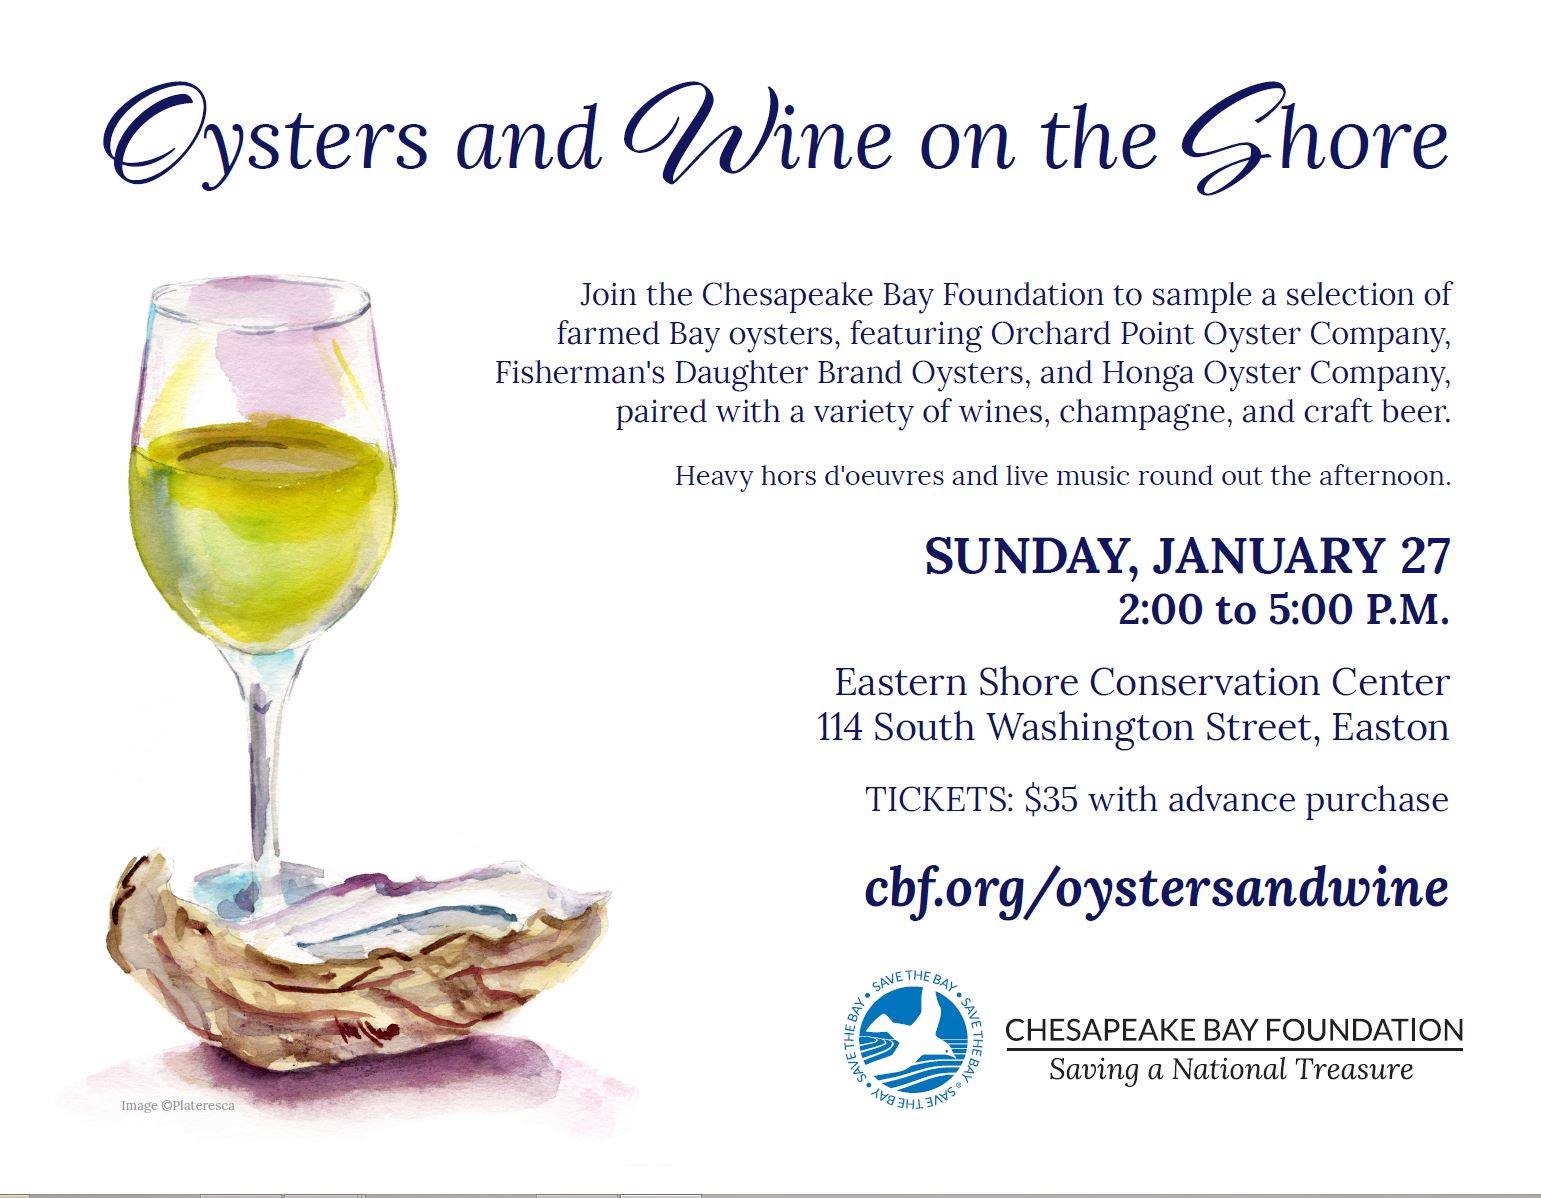 Oysters and Wine January 27 - don't miss out! Courtesy CBF